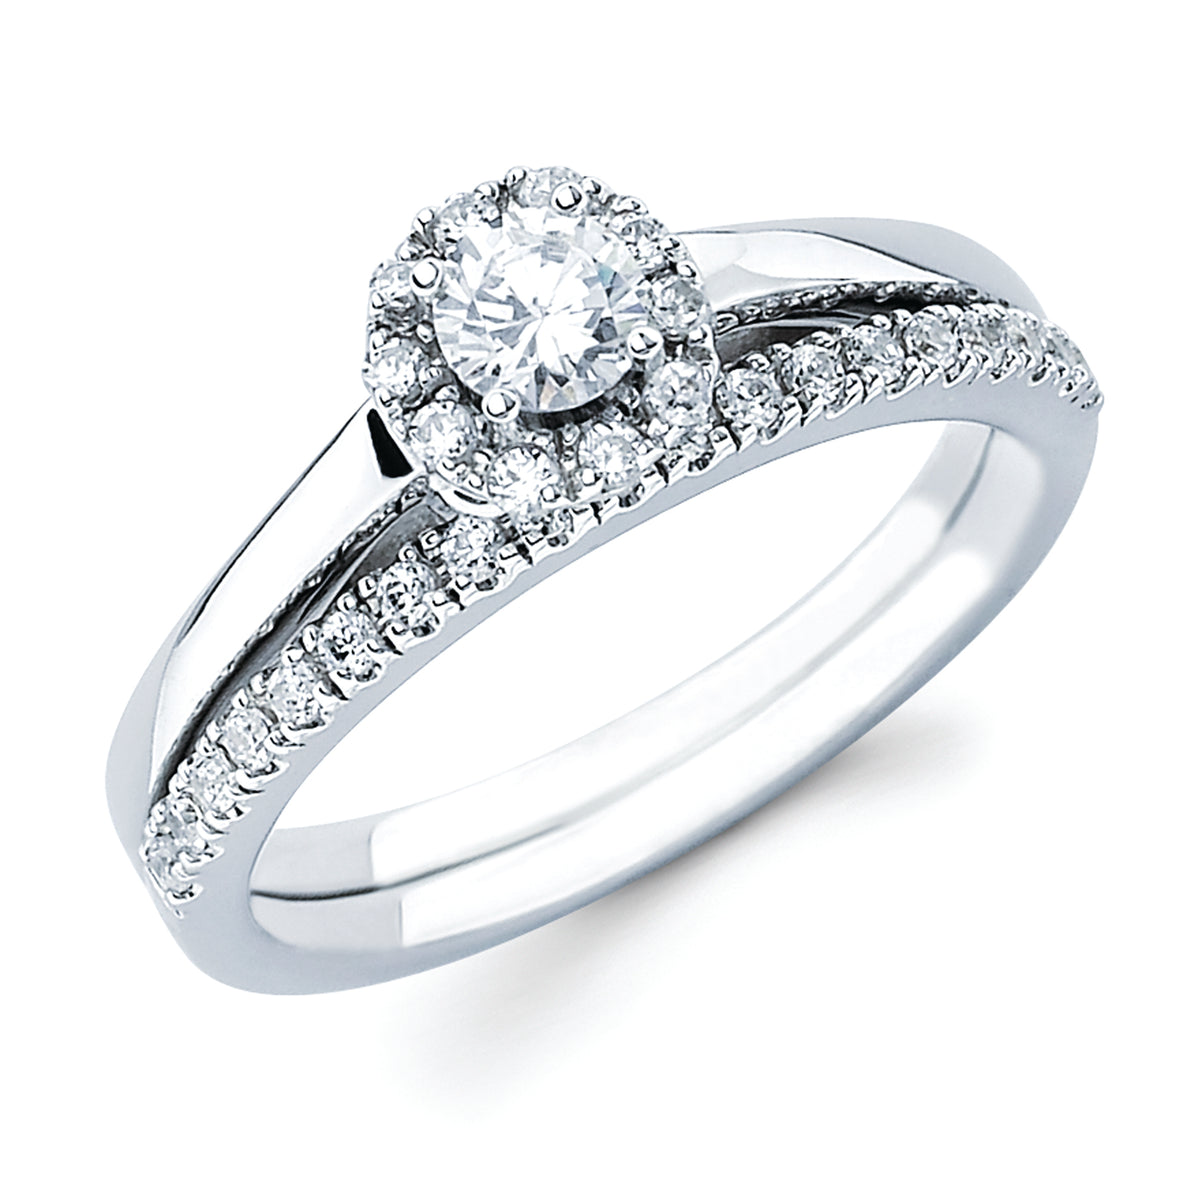 Halo Bridal: 1/10 Ctw. Diamond Halo Semi Mount available for 1/4 Ct. Round Center Diamond in 14K Gold